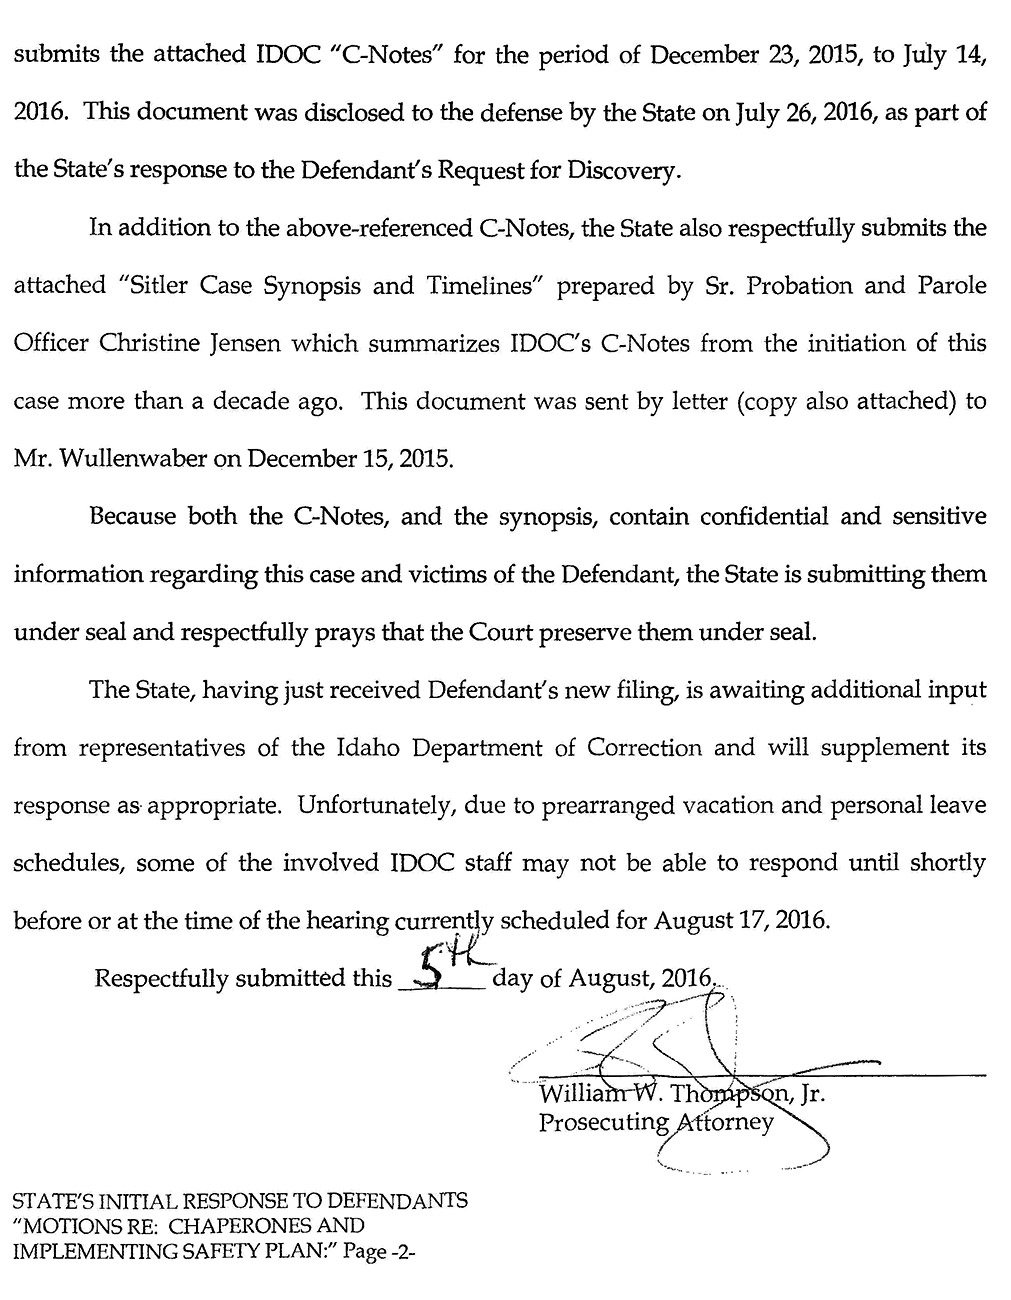 State’s Initial Response to Defendant’s Motions RE: Chaperones and Implementing Safety Plan, page 2